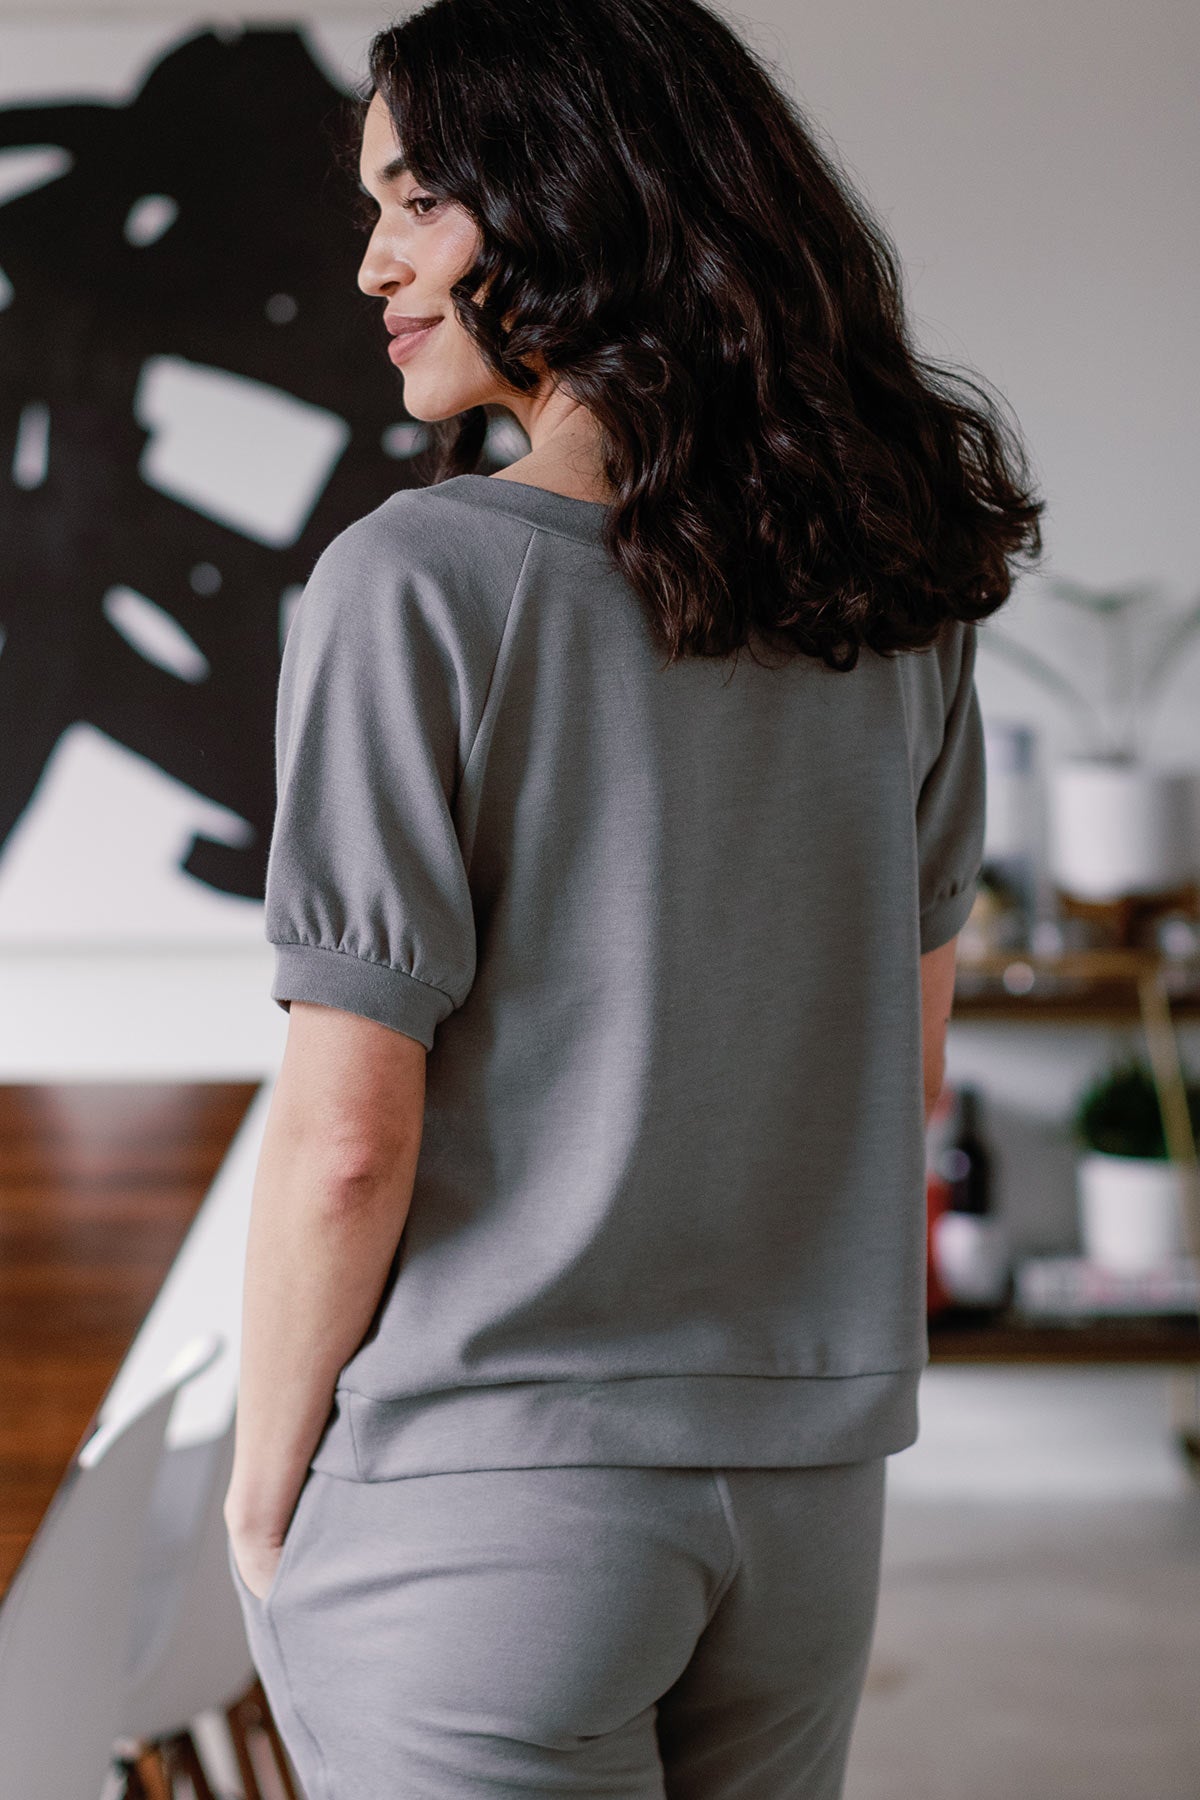 A woman standing facing away from the camera, looking to the side, wearing Yala Berkeley Puff Short Sleeve Bamboo and Organic Cotton Raglan Sweatshirt Top in Space Grey